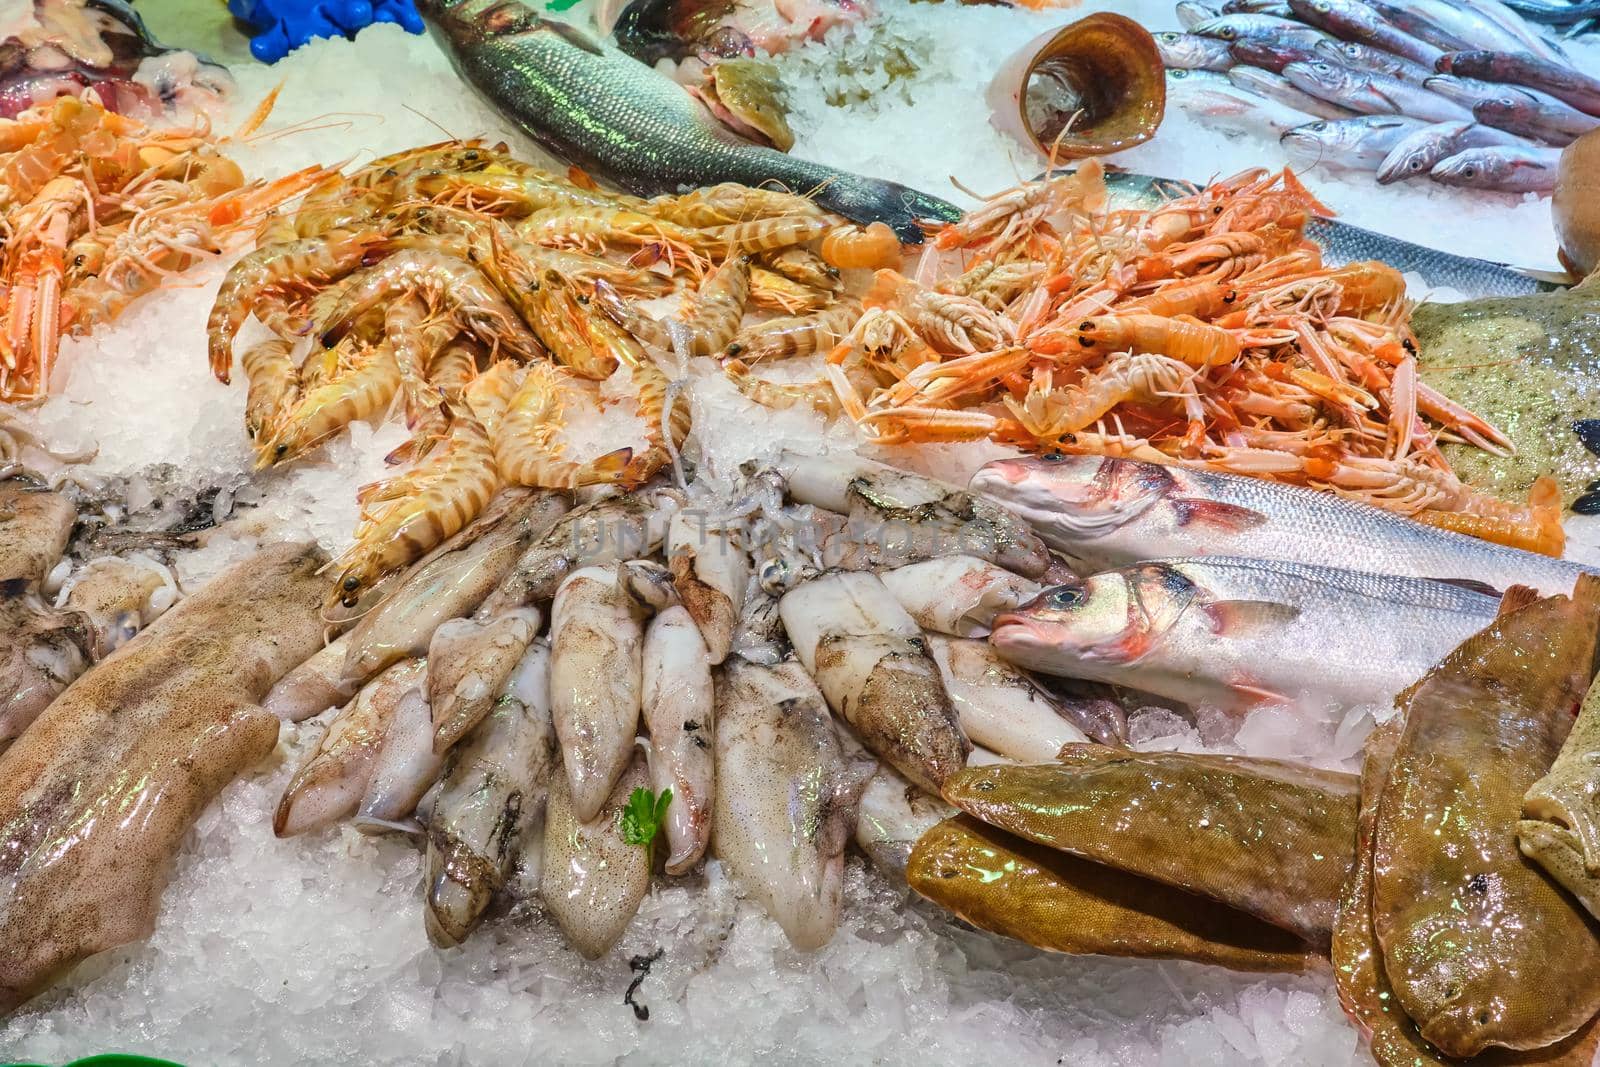 Fish, crustaceans and other seafood for sale at the Boqueria in Barcelona